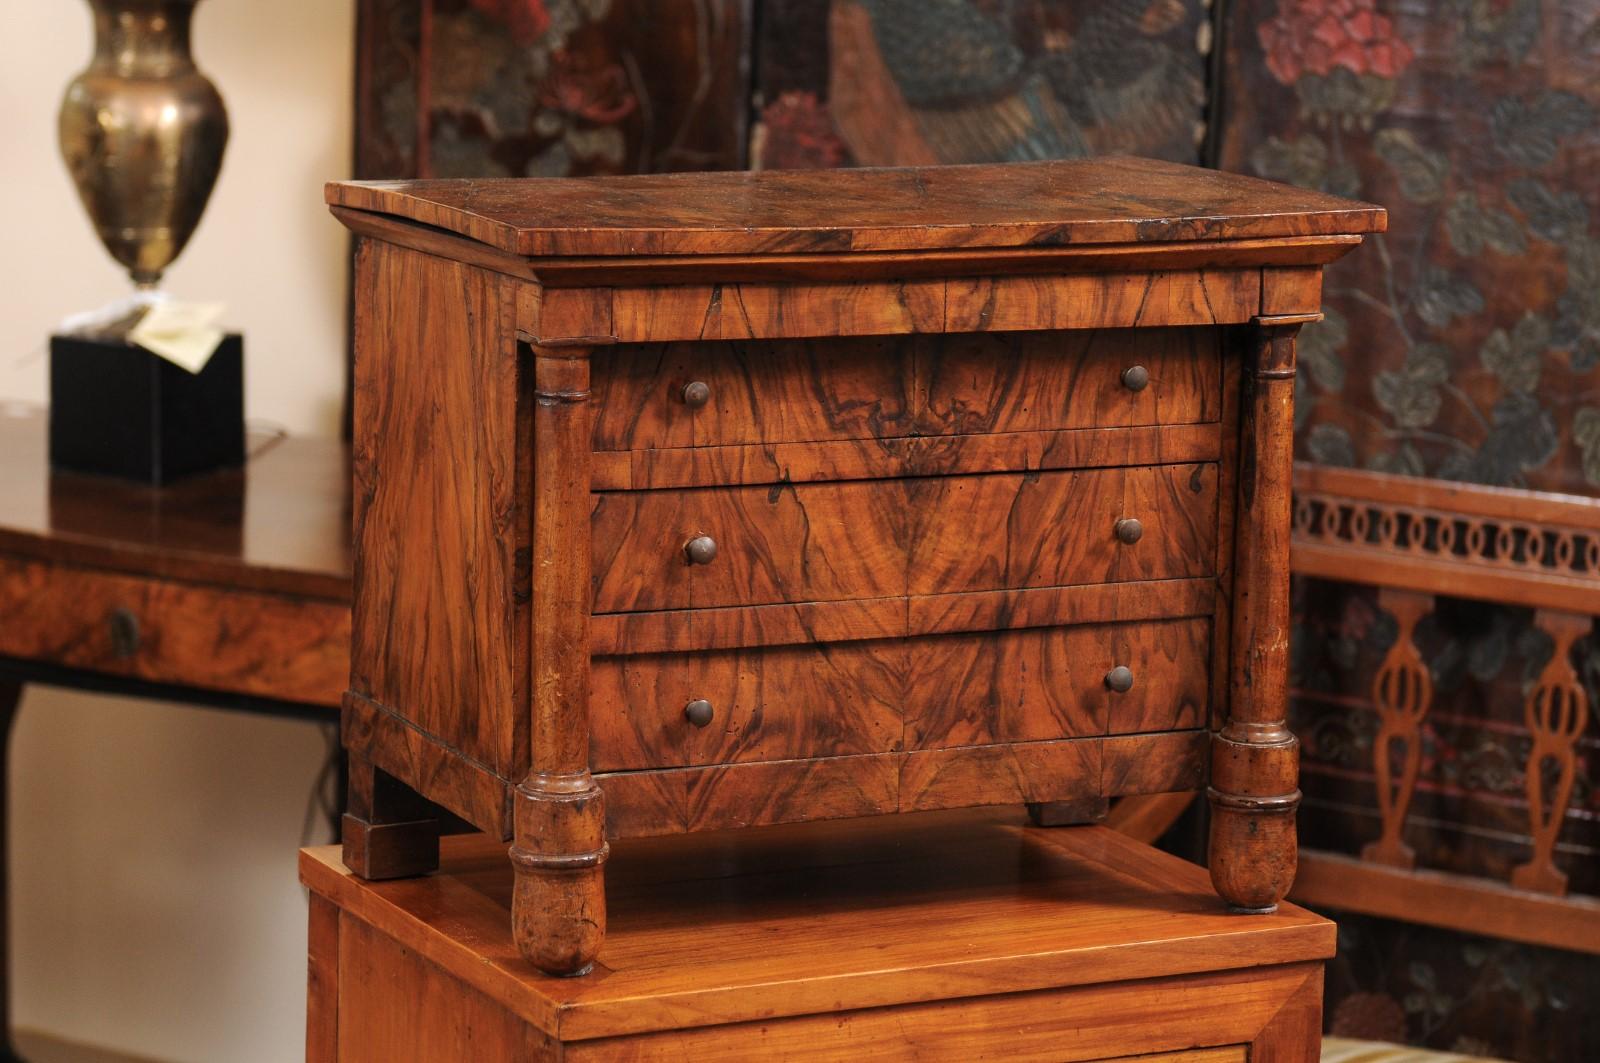 Early 19th century French Empire Apprentice Commode in walnut with lift top. Table top item.